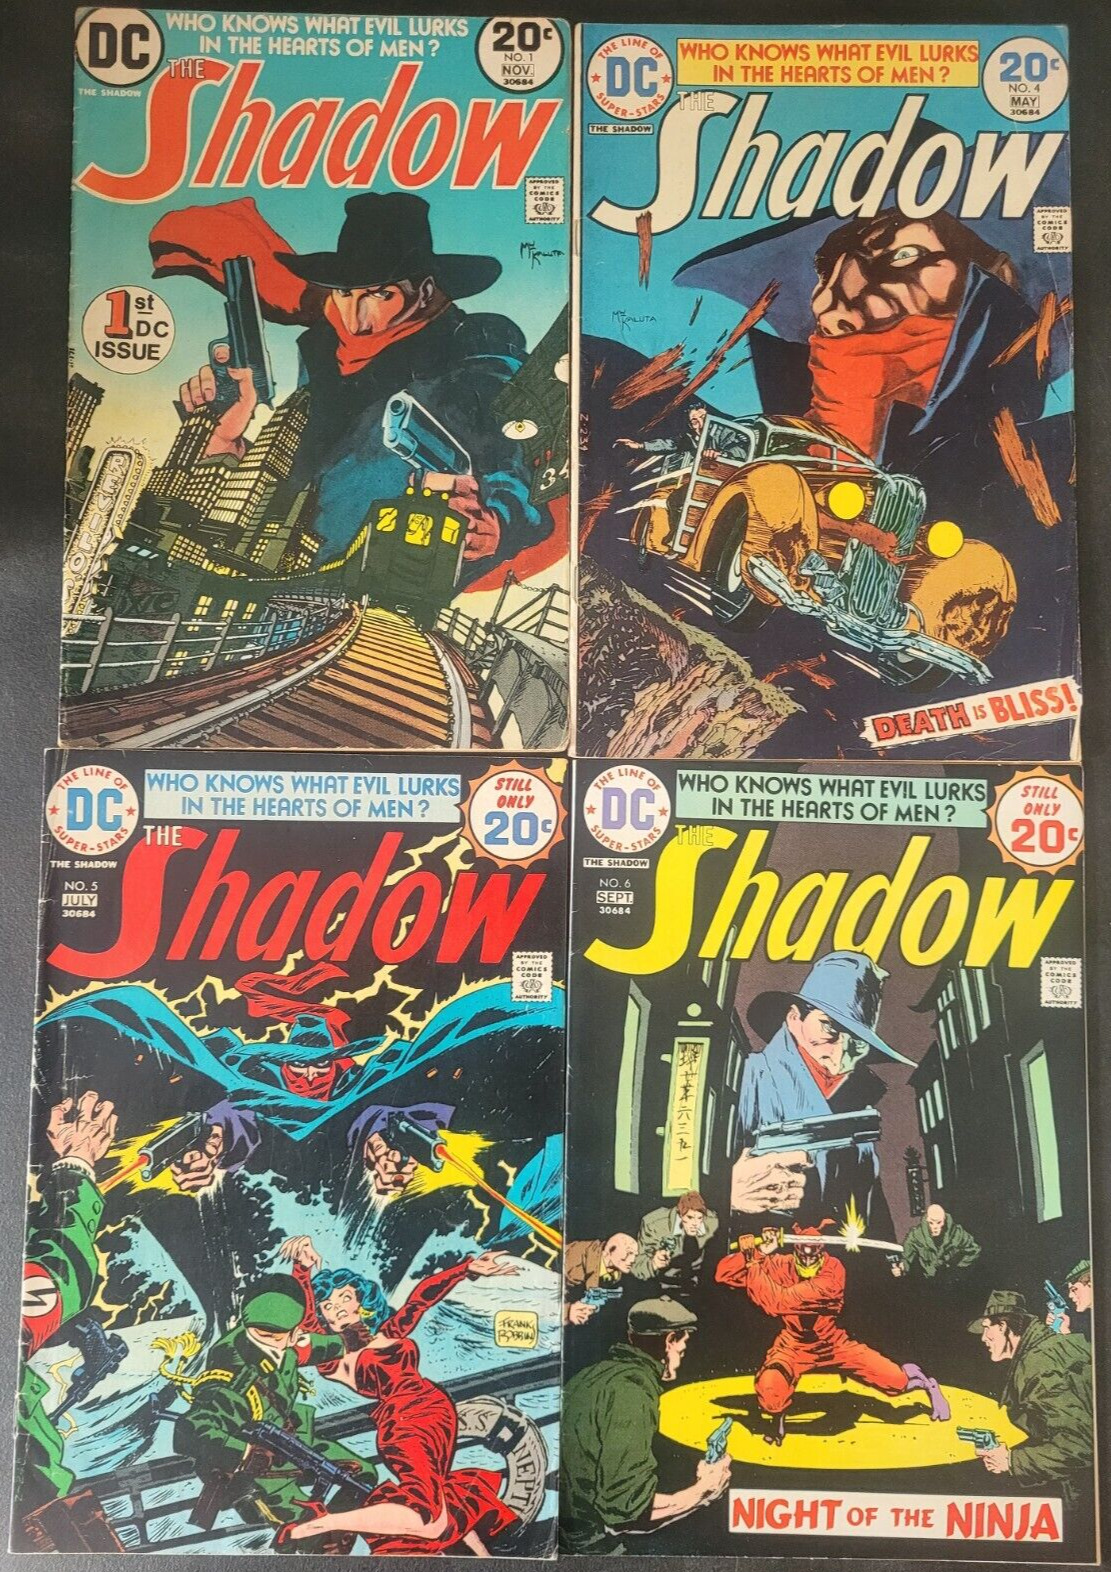 THE SHADOW #1 4 5 6 8 9 12 (1973) DC COMICS SET OF 7 ISSUES MIKE KALUTA+